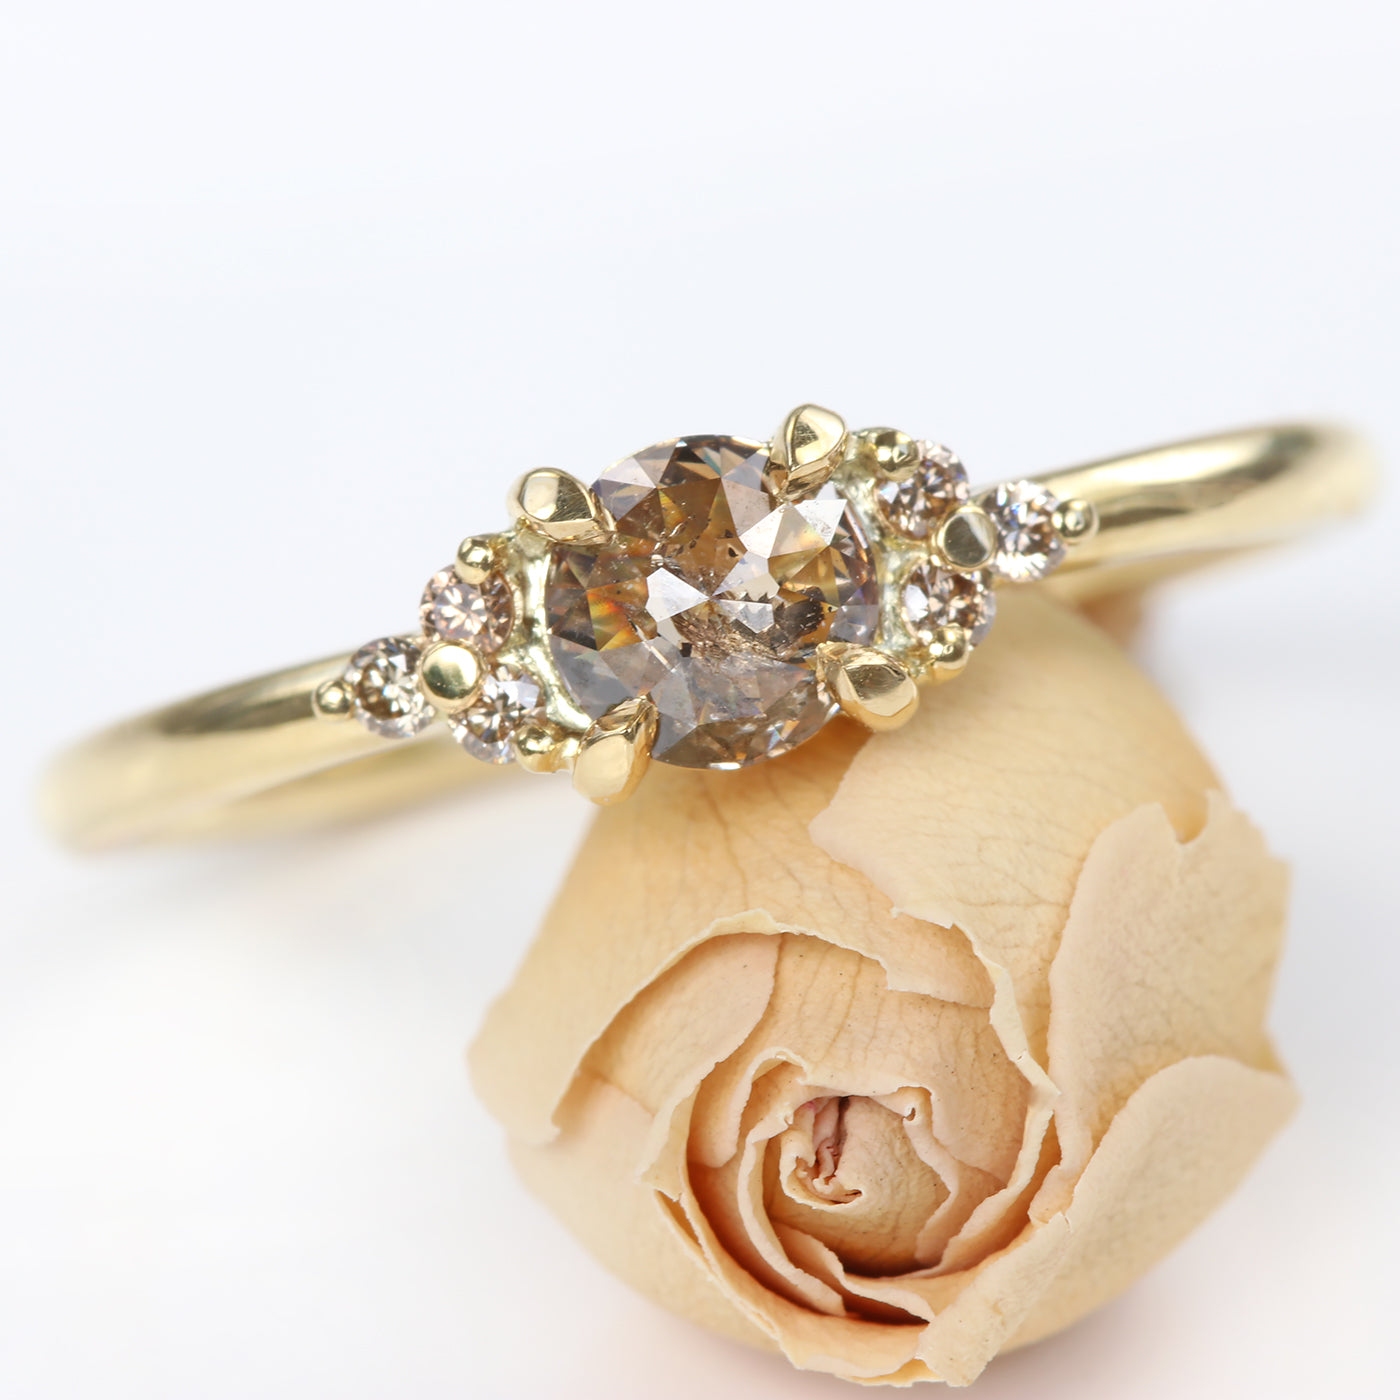 18ct Gold Champagne Diamond Cluster Engagement Ring (Size K 1/2, Resize I 1/2 to L)